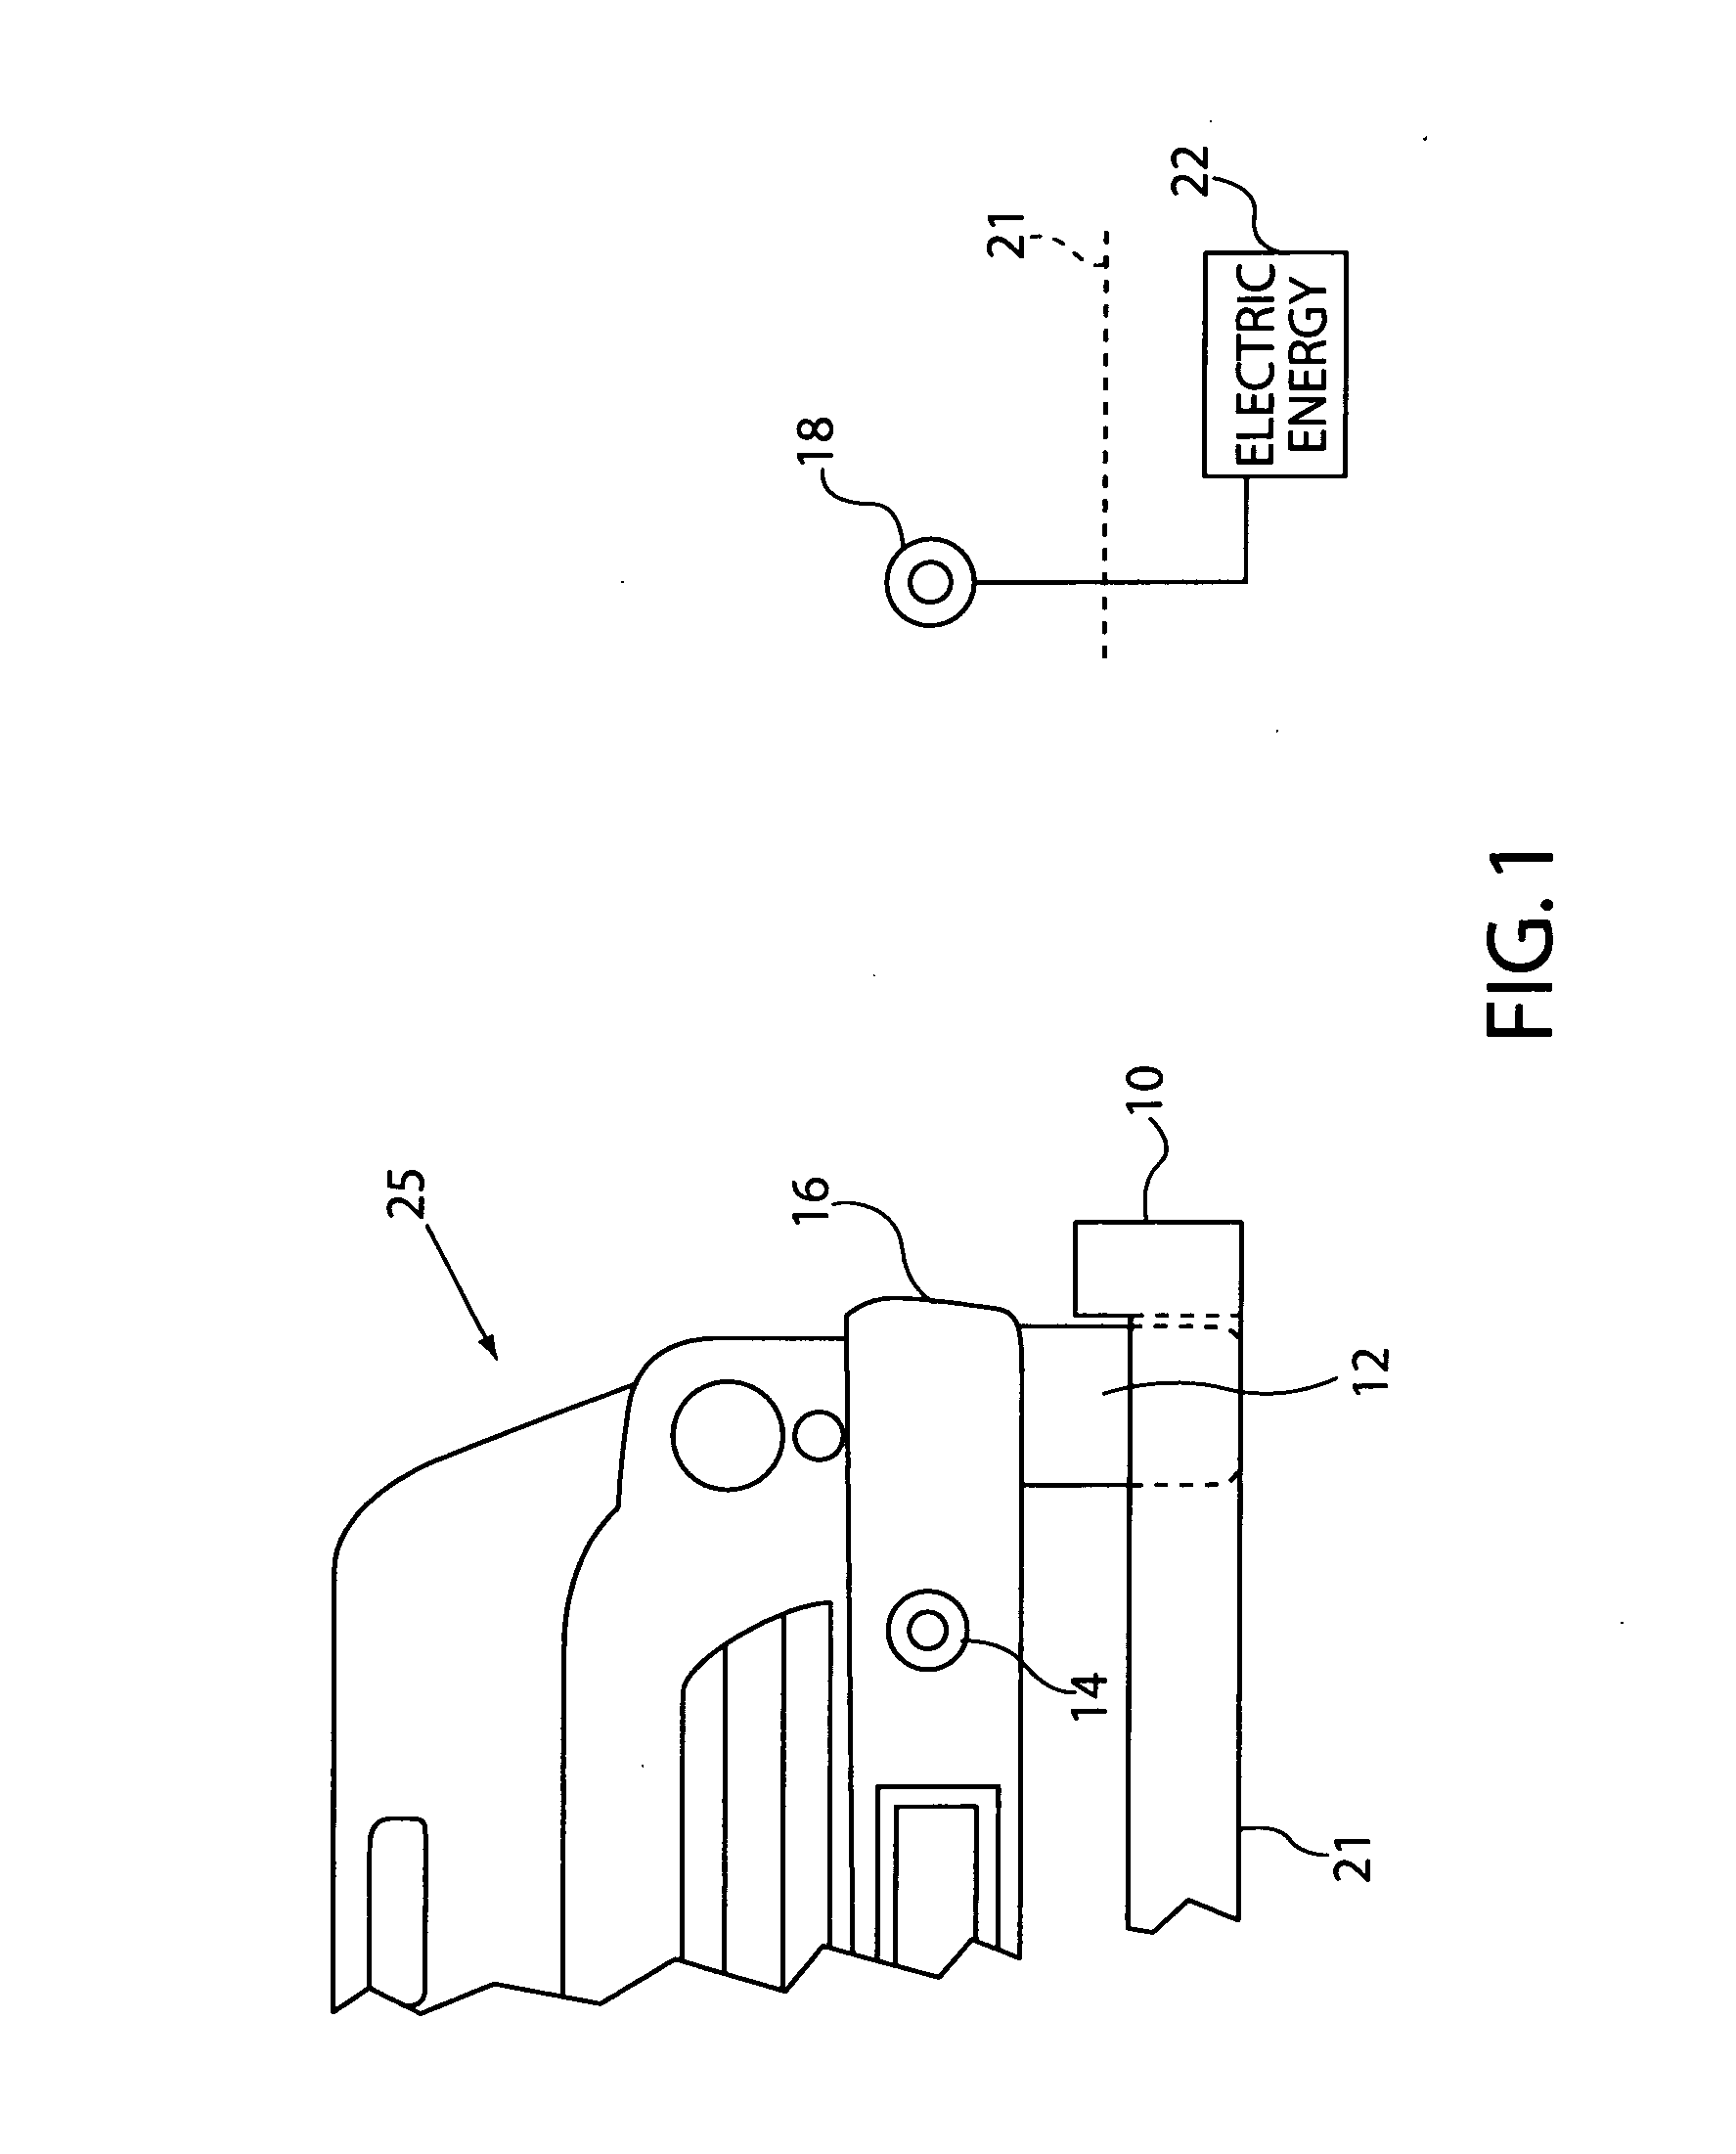 Hybrid automotive vehicle with solar battery charging